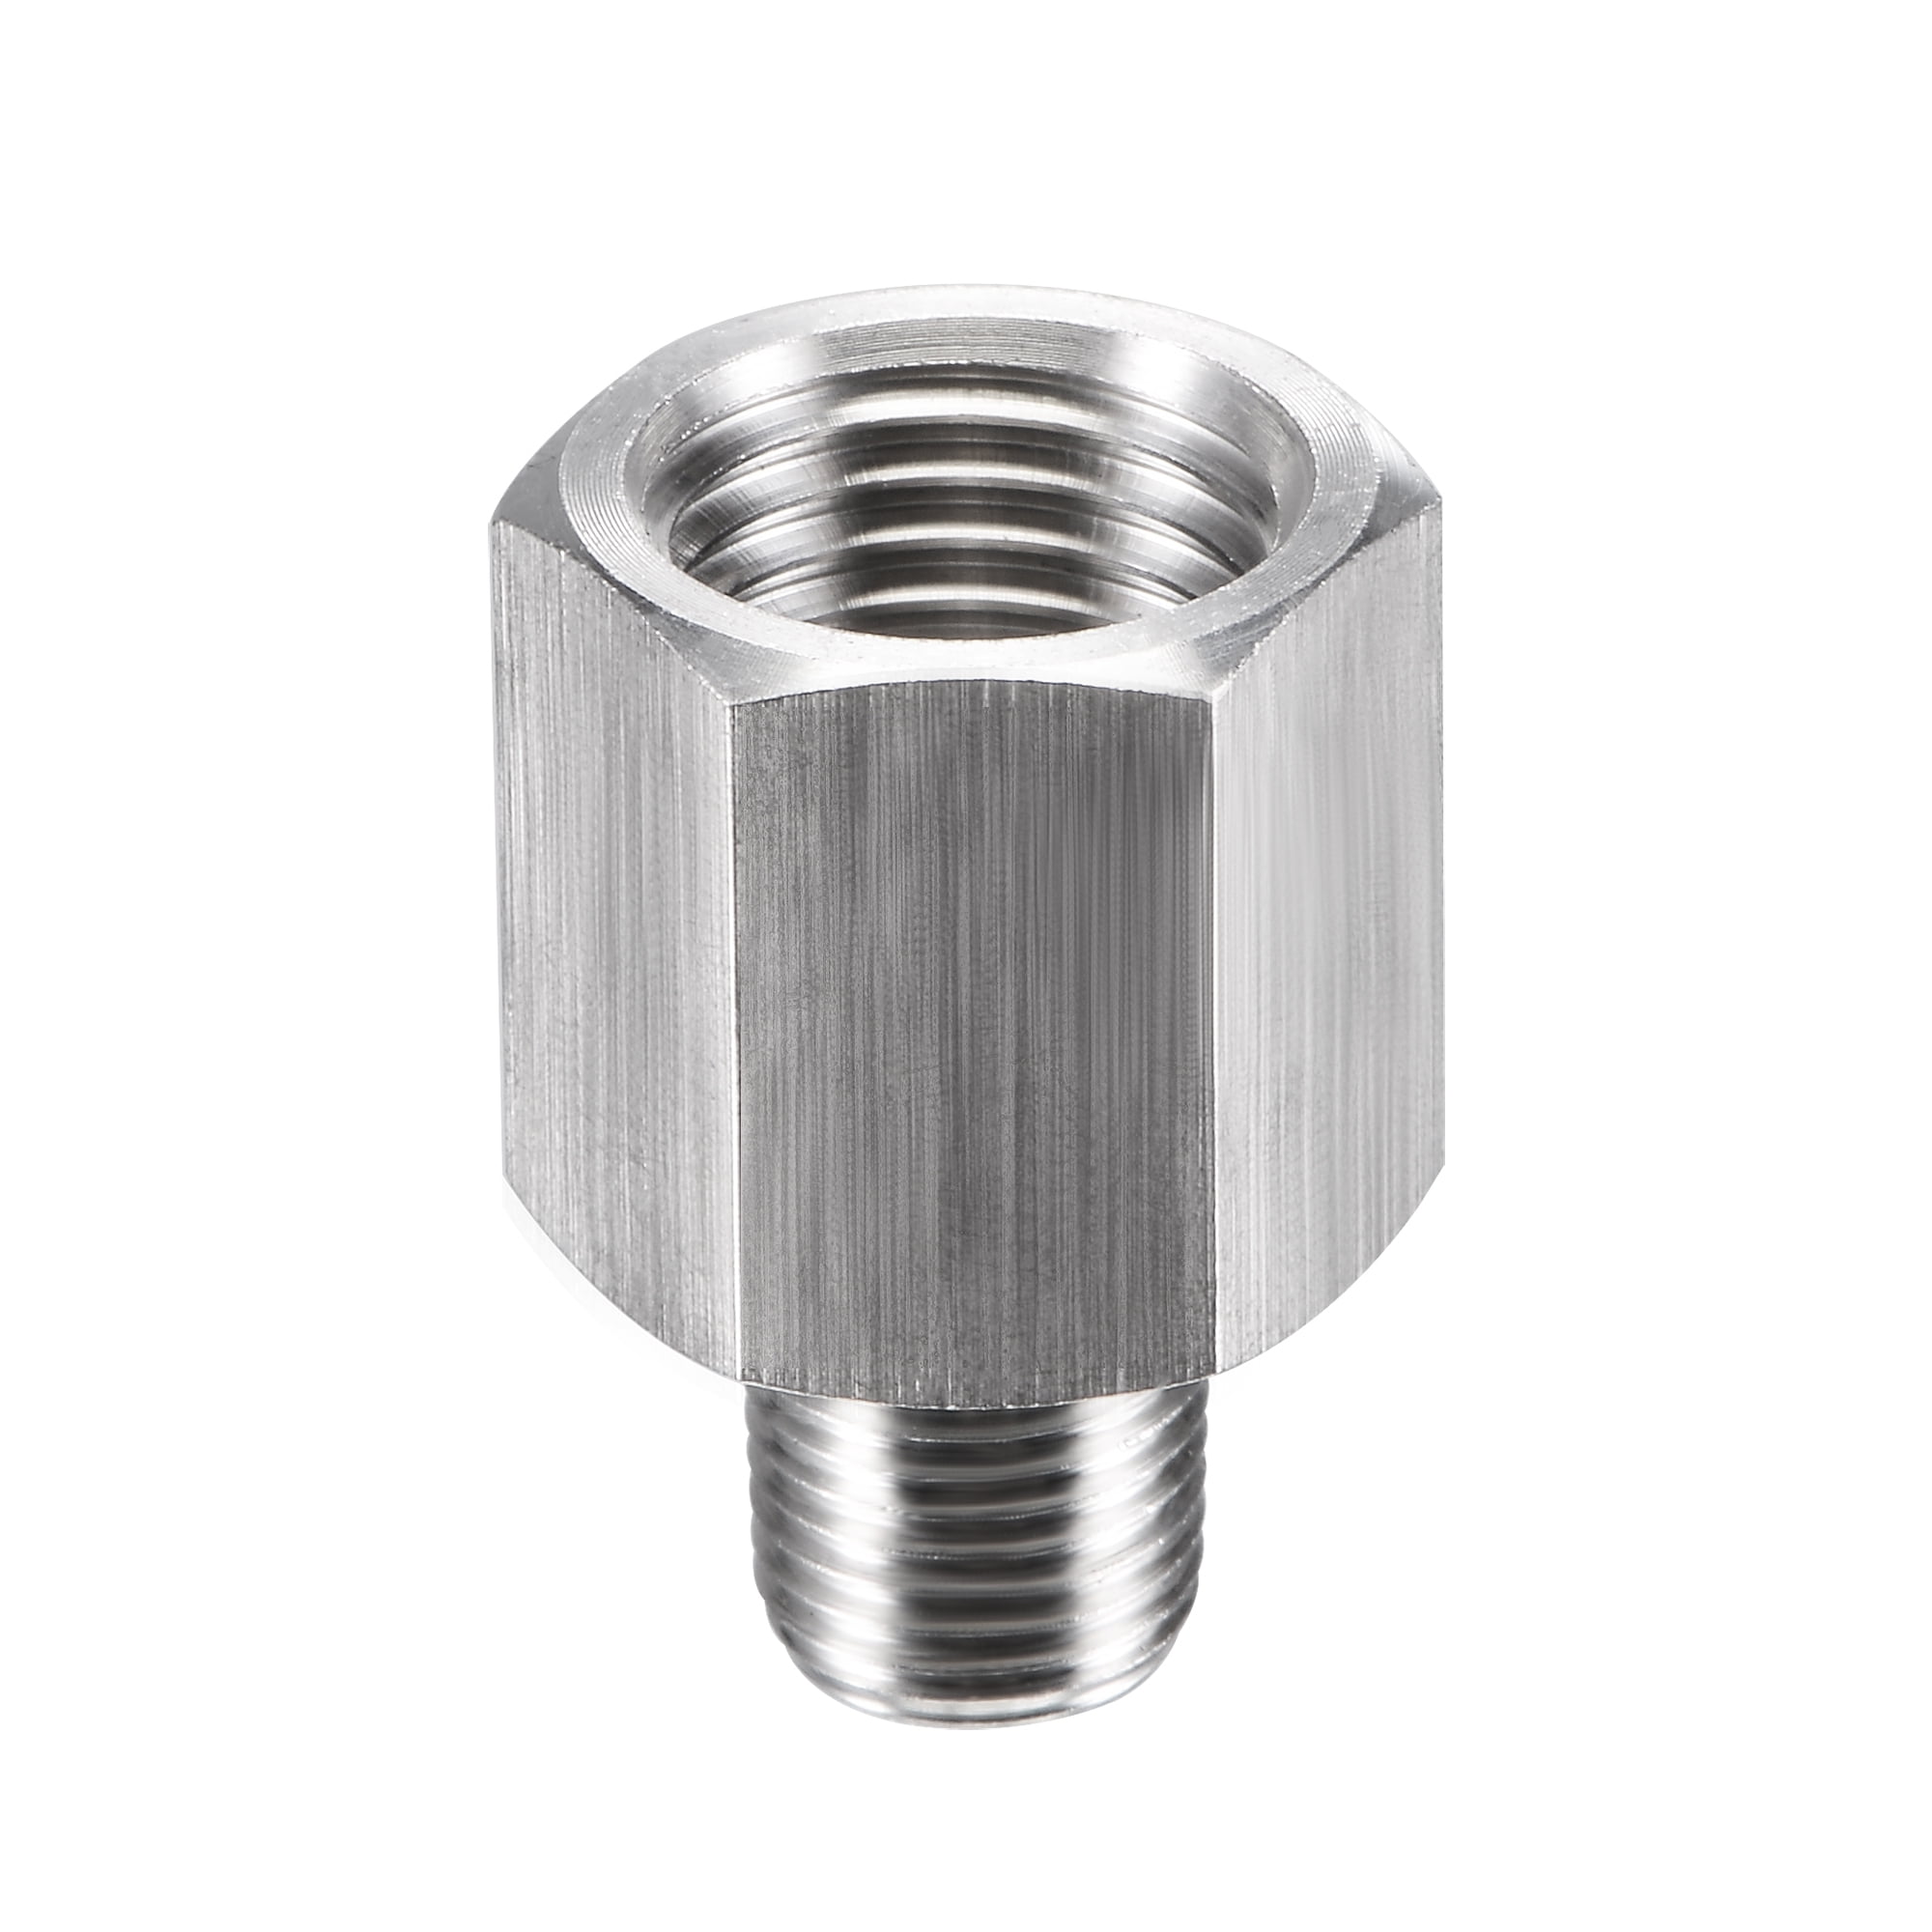 Unique Bargains Pipe Fitting Reducer Adapter 1/8 NPT Male x 1/4